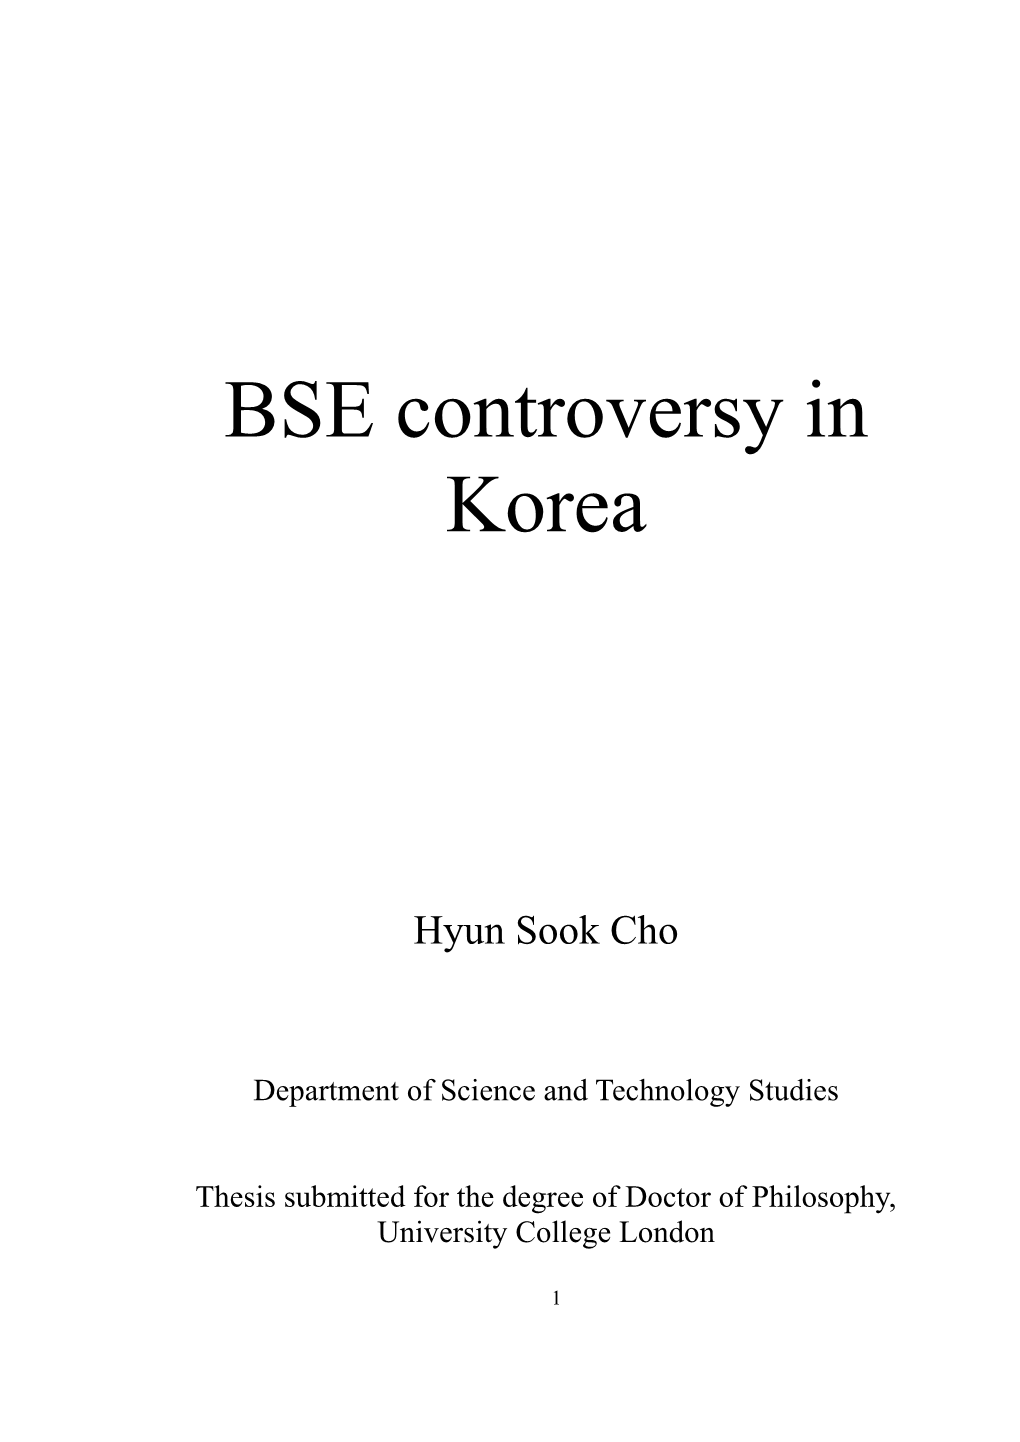 BSE Controversy in Korea